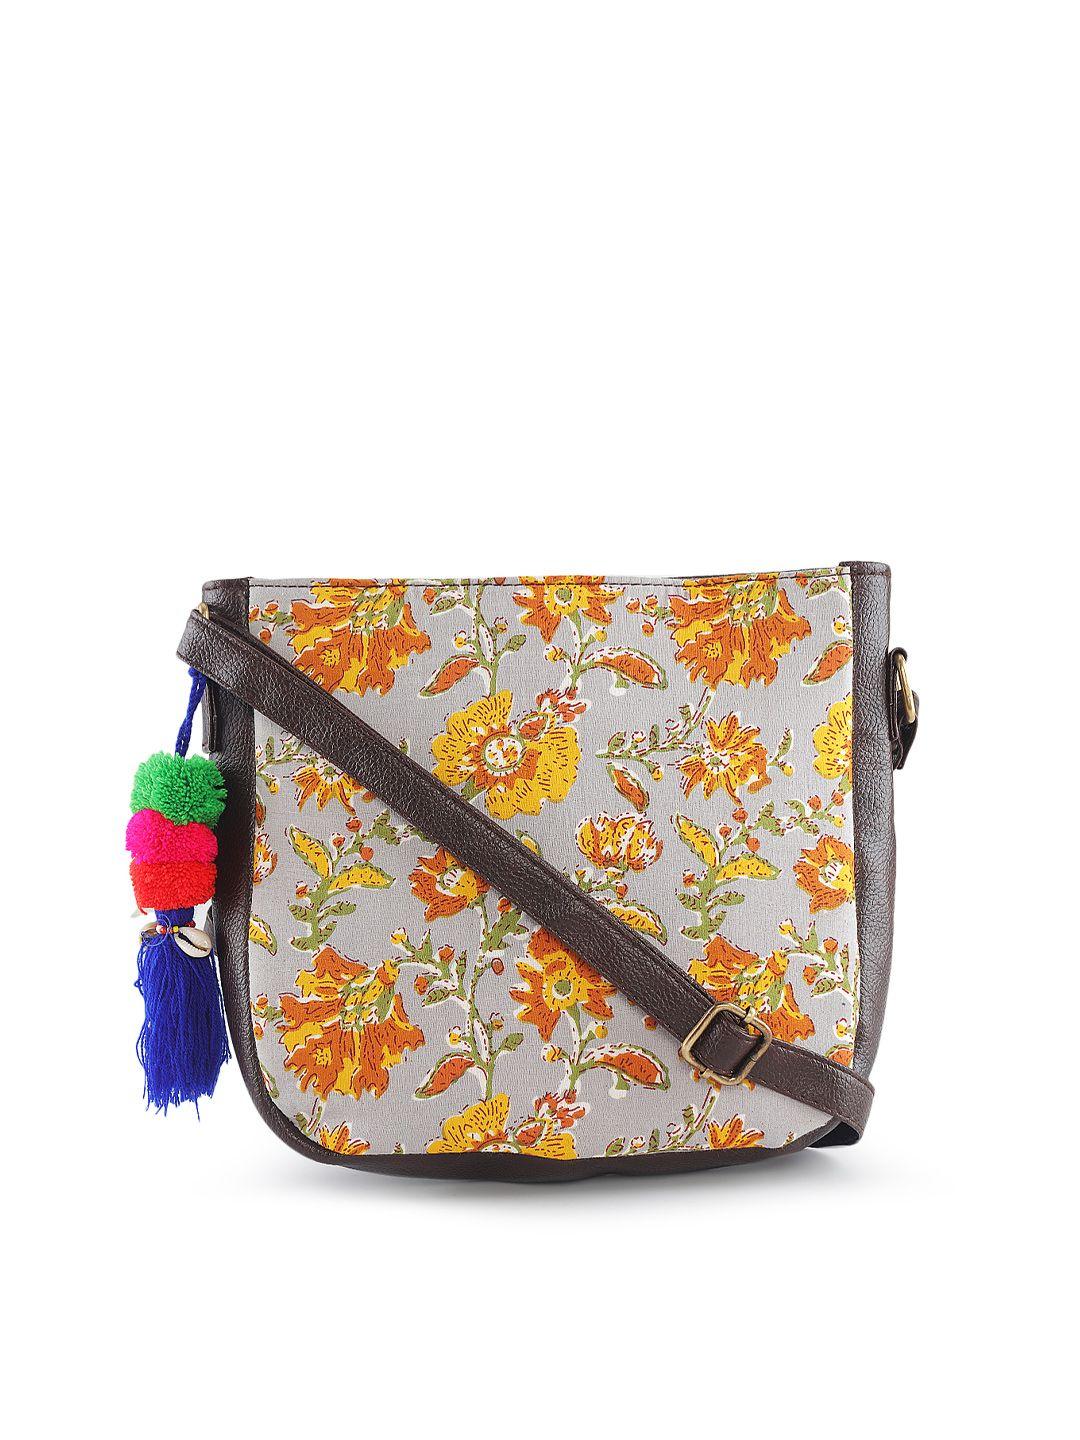 nepri women floral printed structured sling bag with tasselled